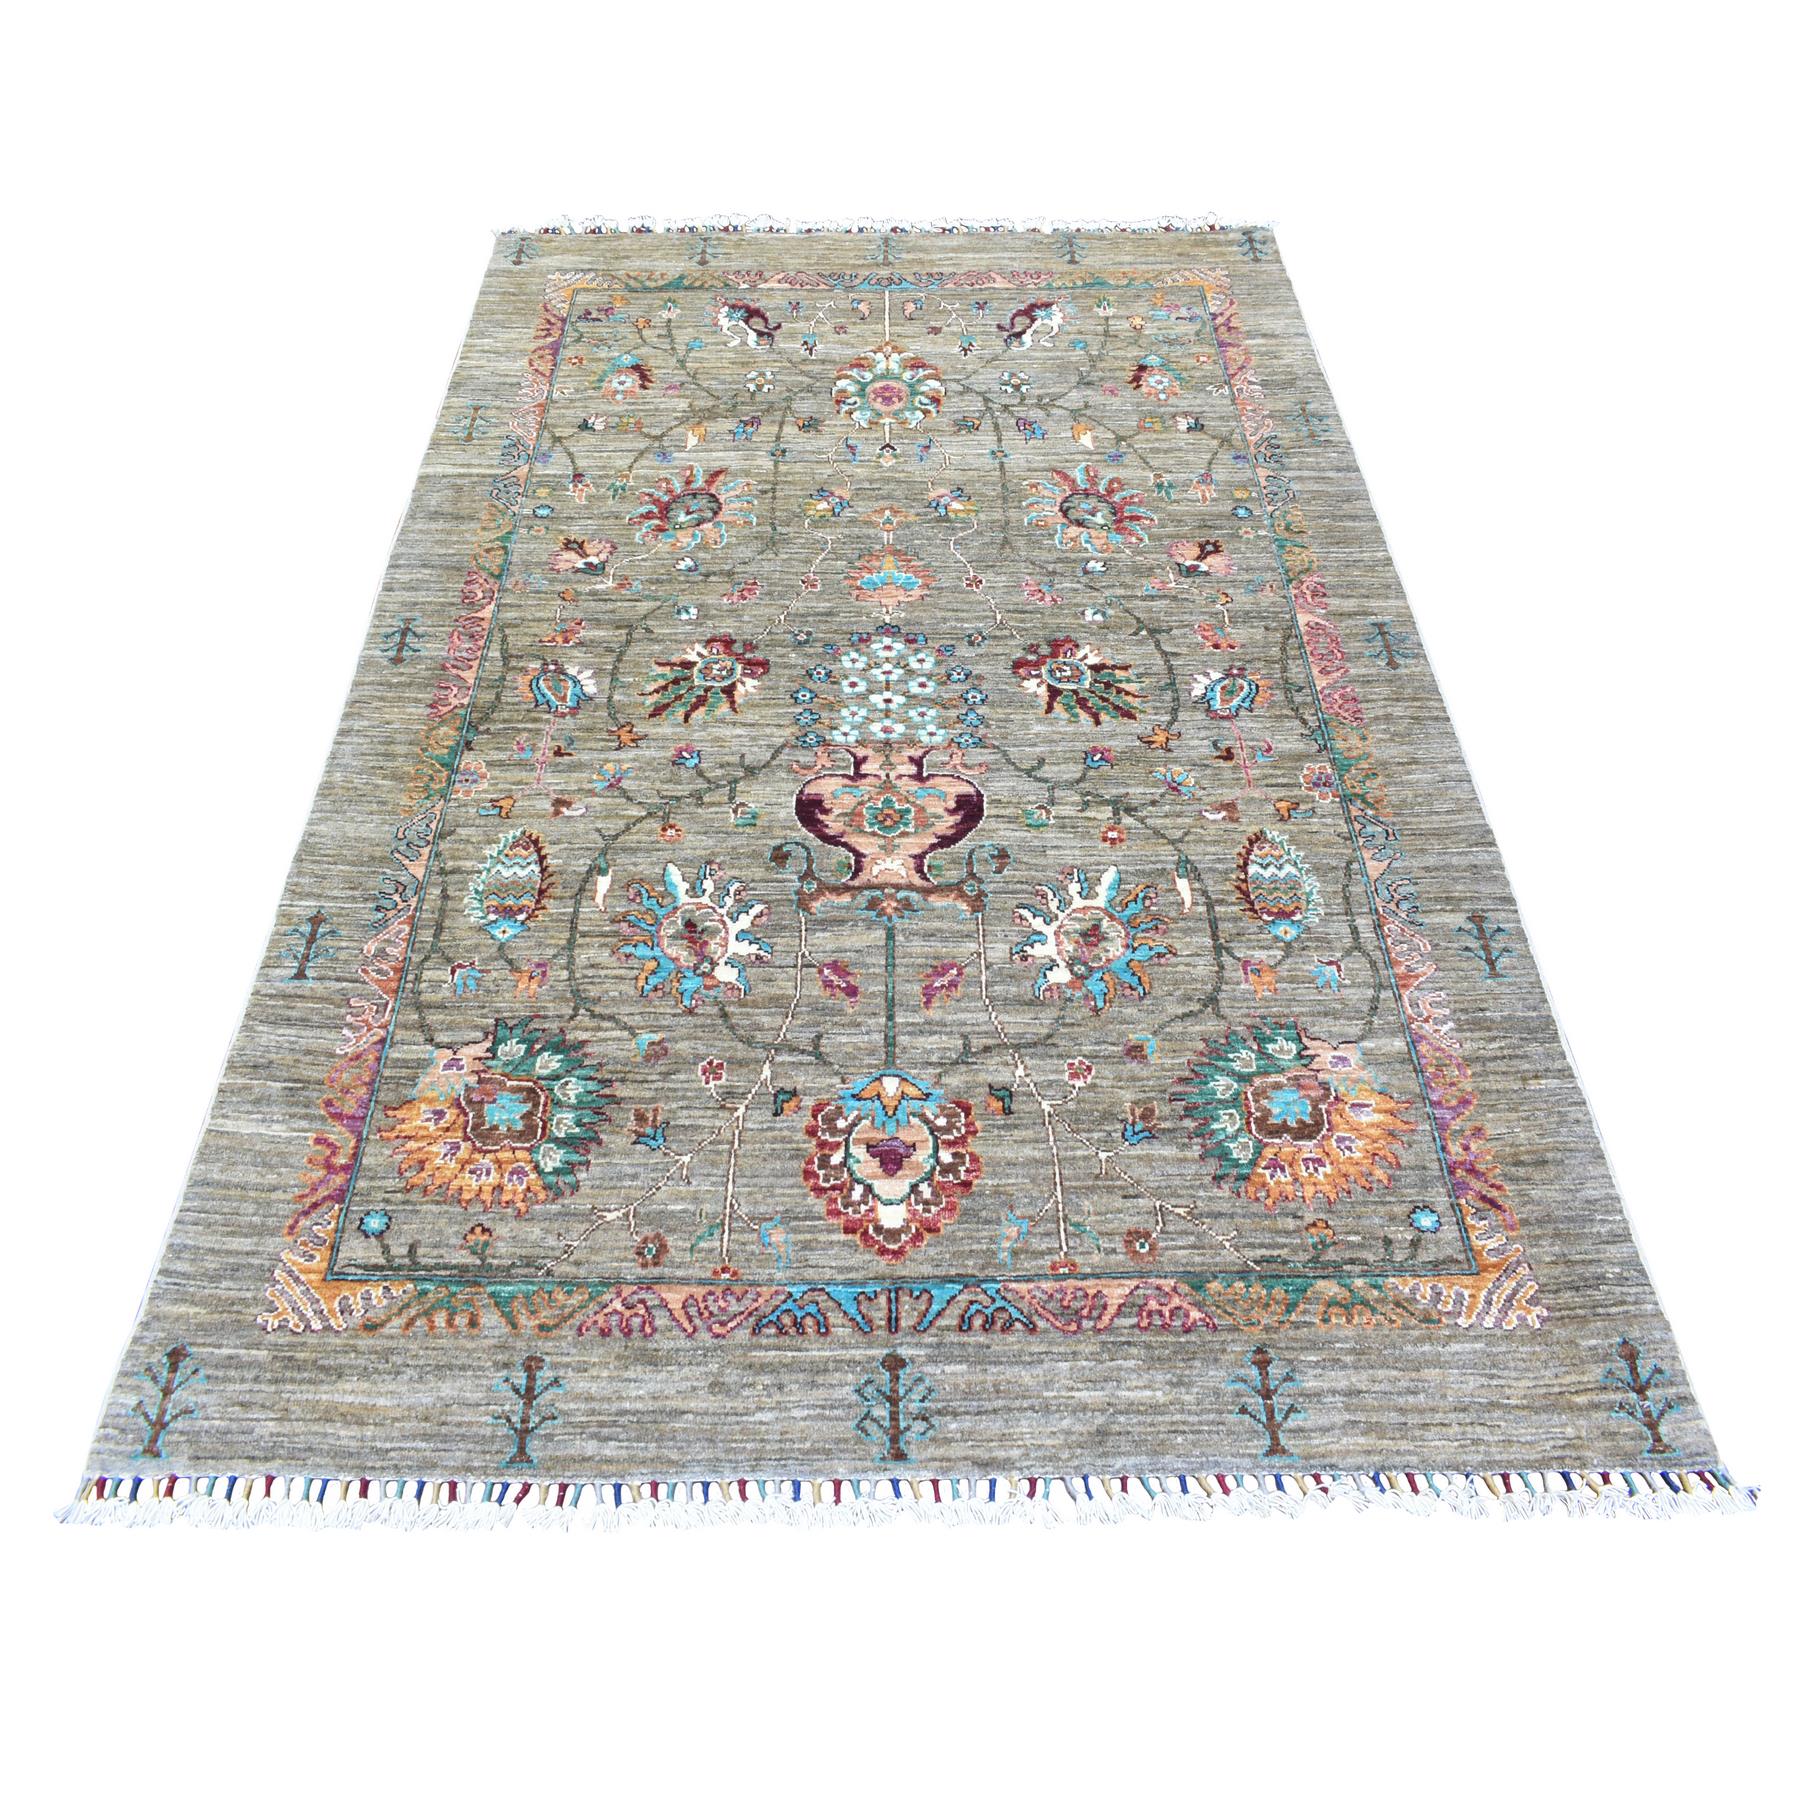 5'x6'10" Taupe, Extra Soft Wool Hand Woven, Afghan Super Kazak with Repetitive Caucasian Gul Design Natural Dyes Densely Weave, Oriental Rug 